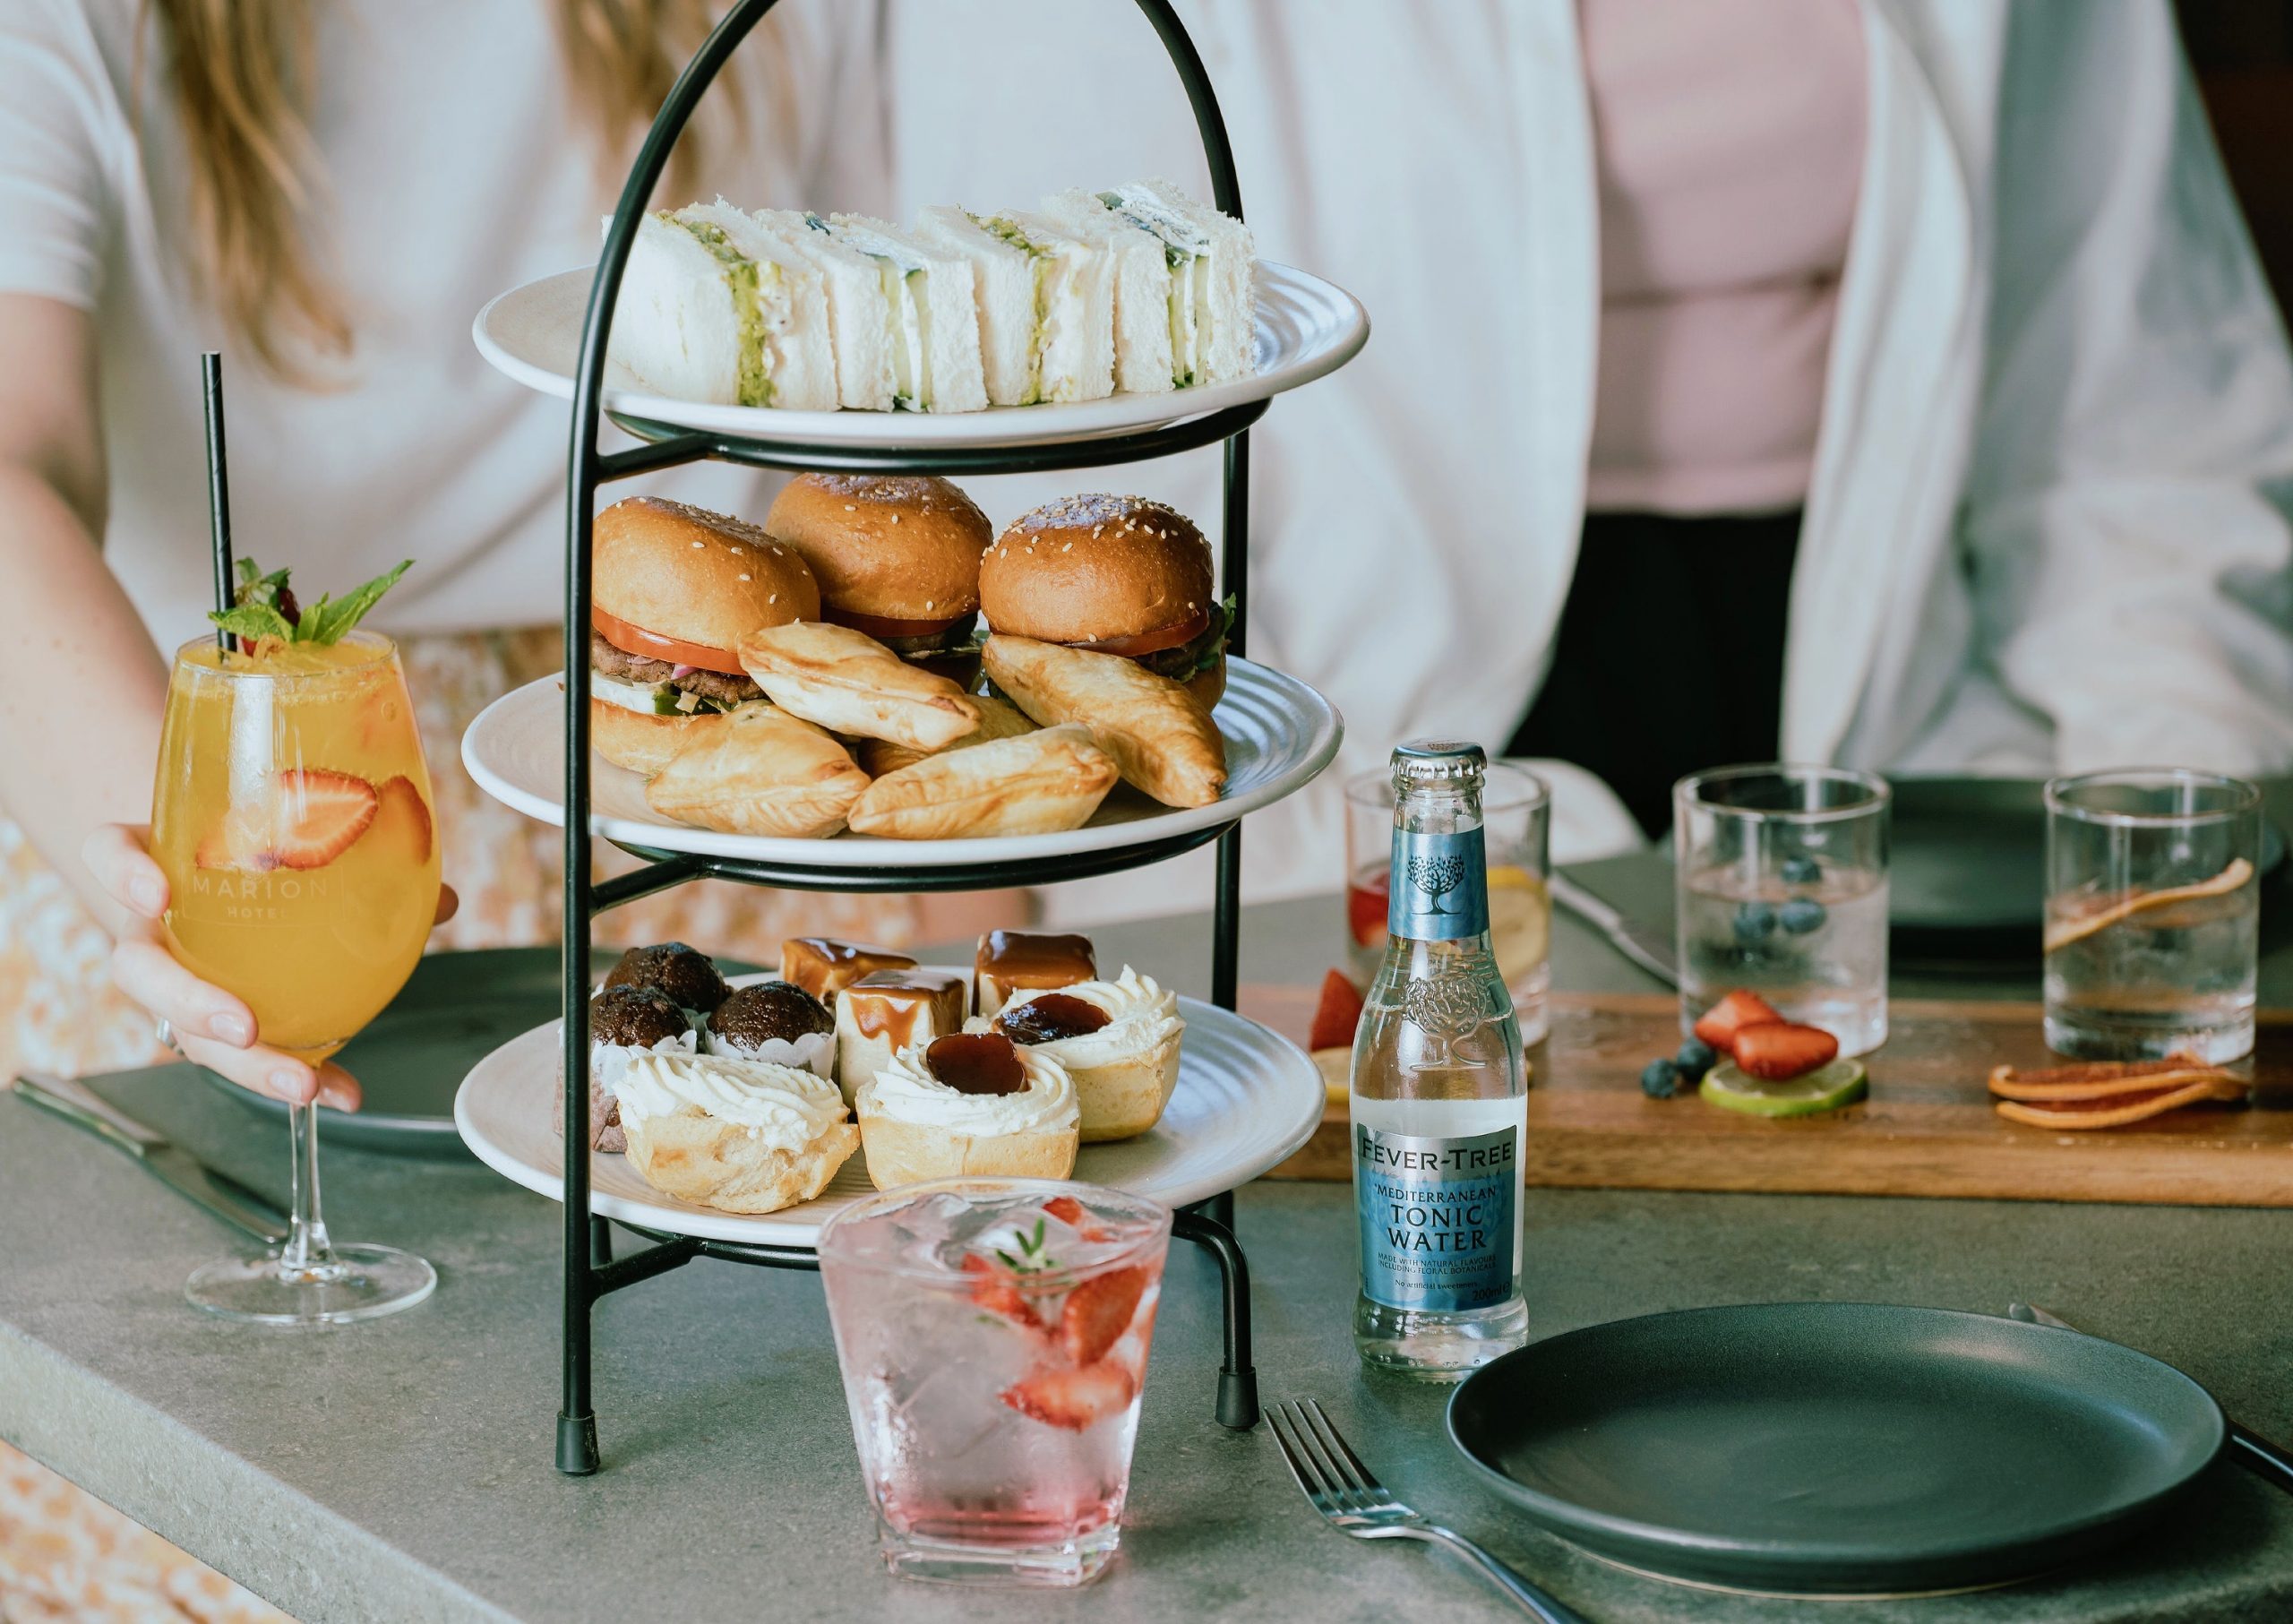 WIN a high tea and gin flight for four people at the Marion Hotel!